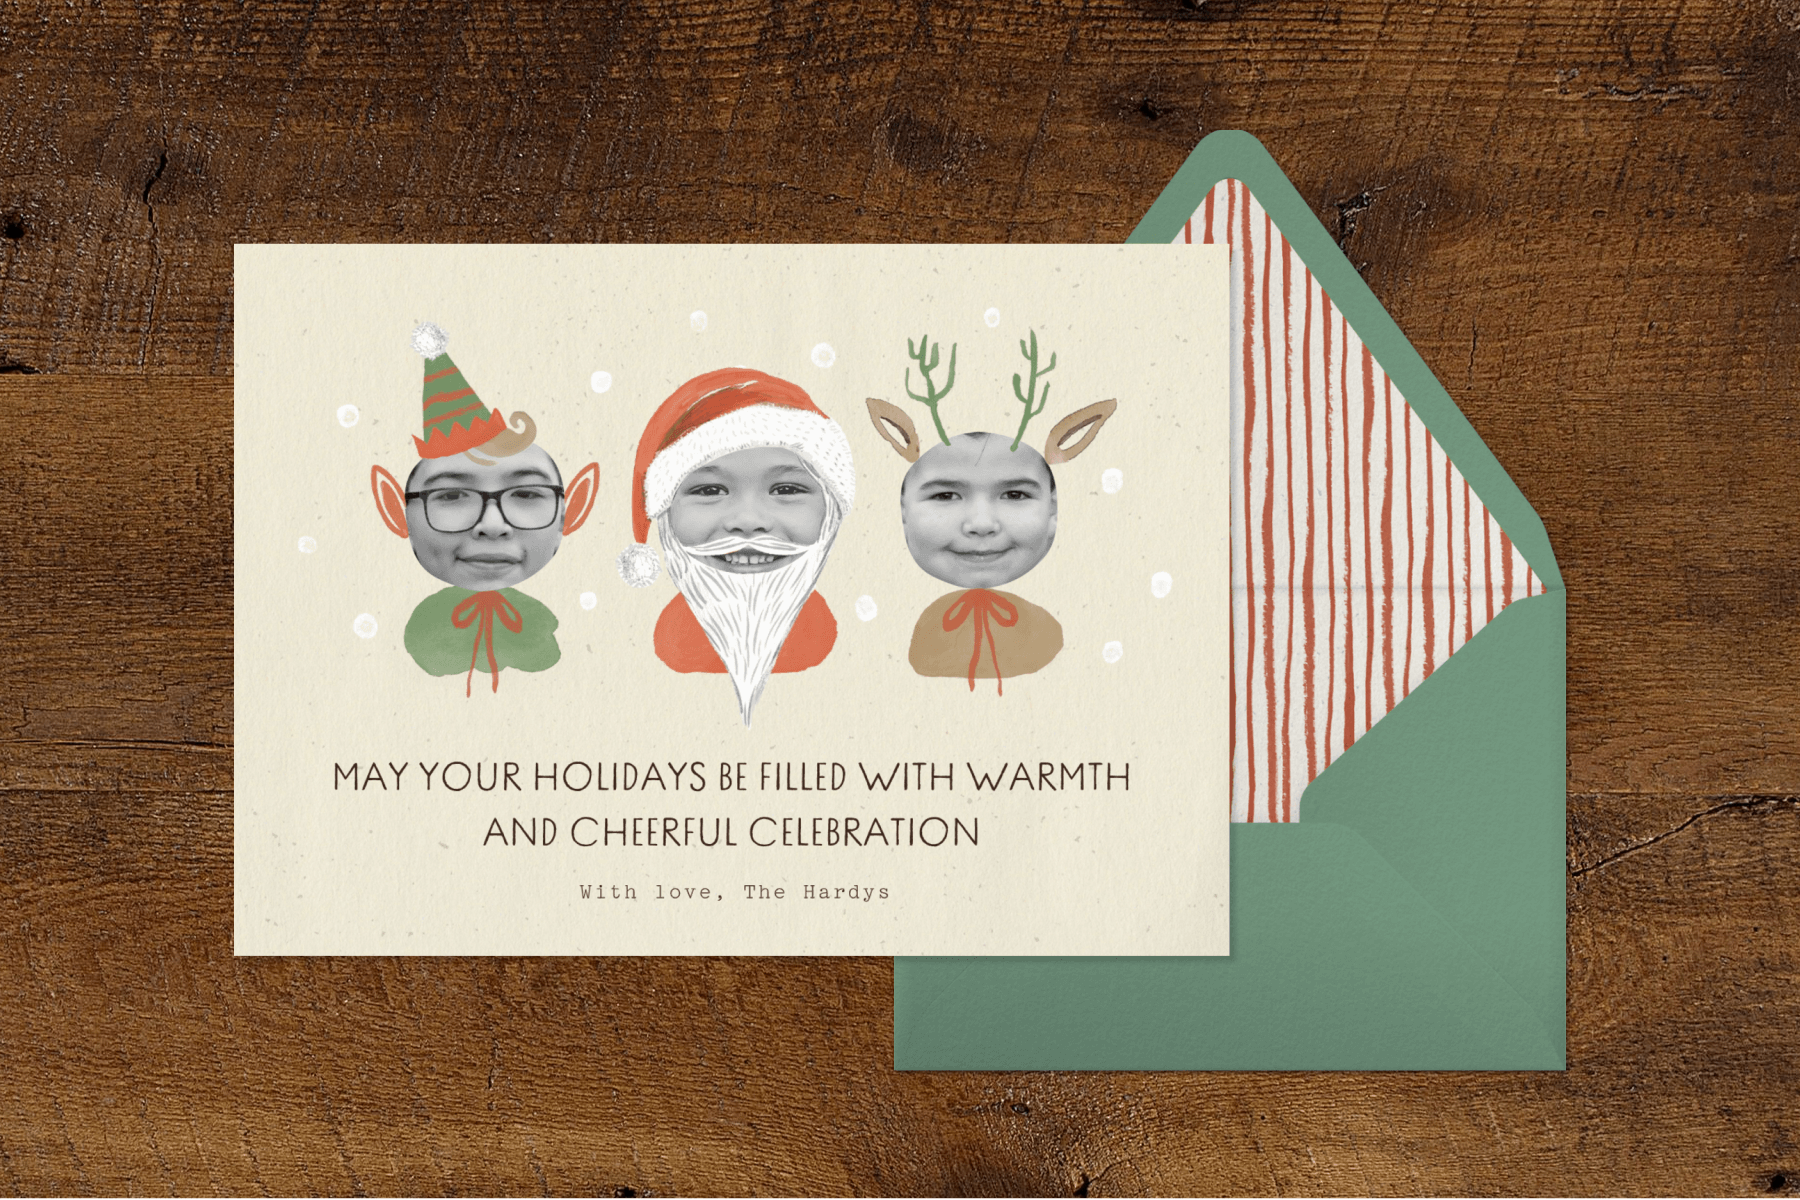 A card with photos of three children with illustrations to make them look like an elf, Santa Claus, and a reindeer.